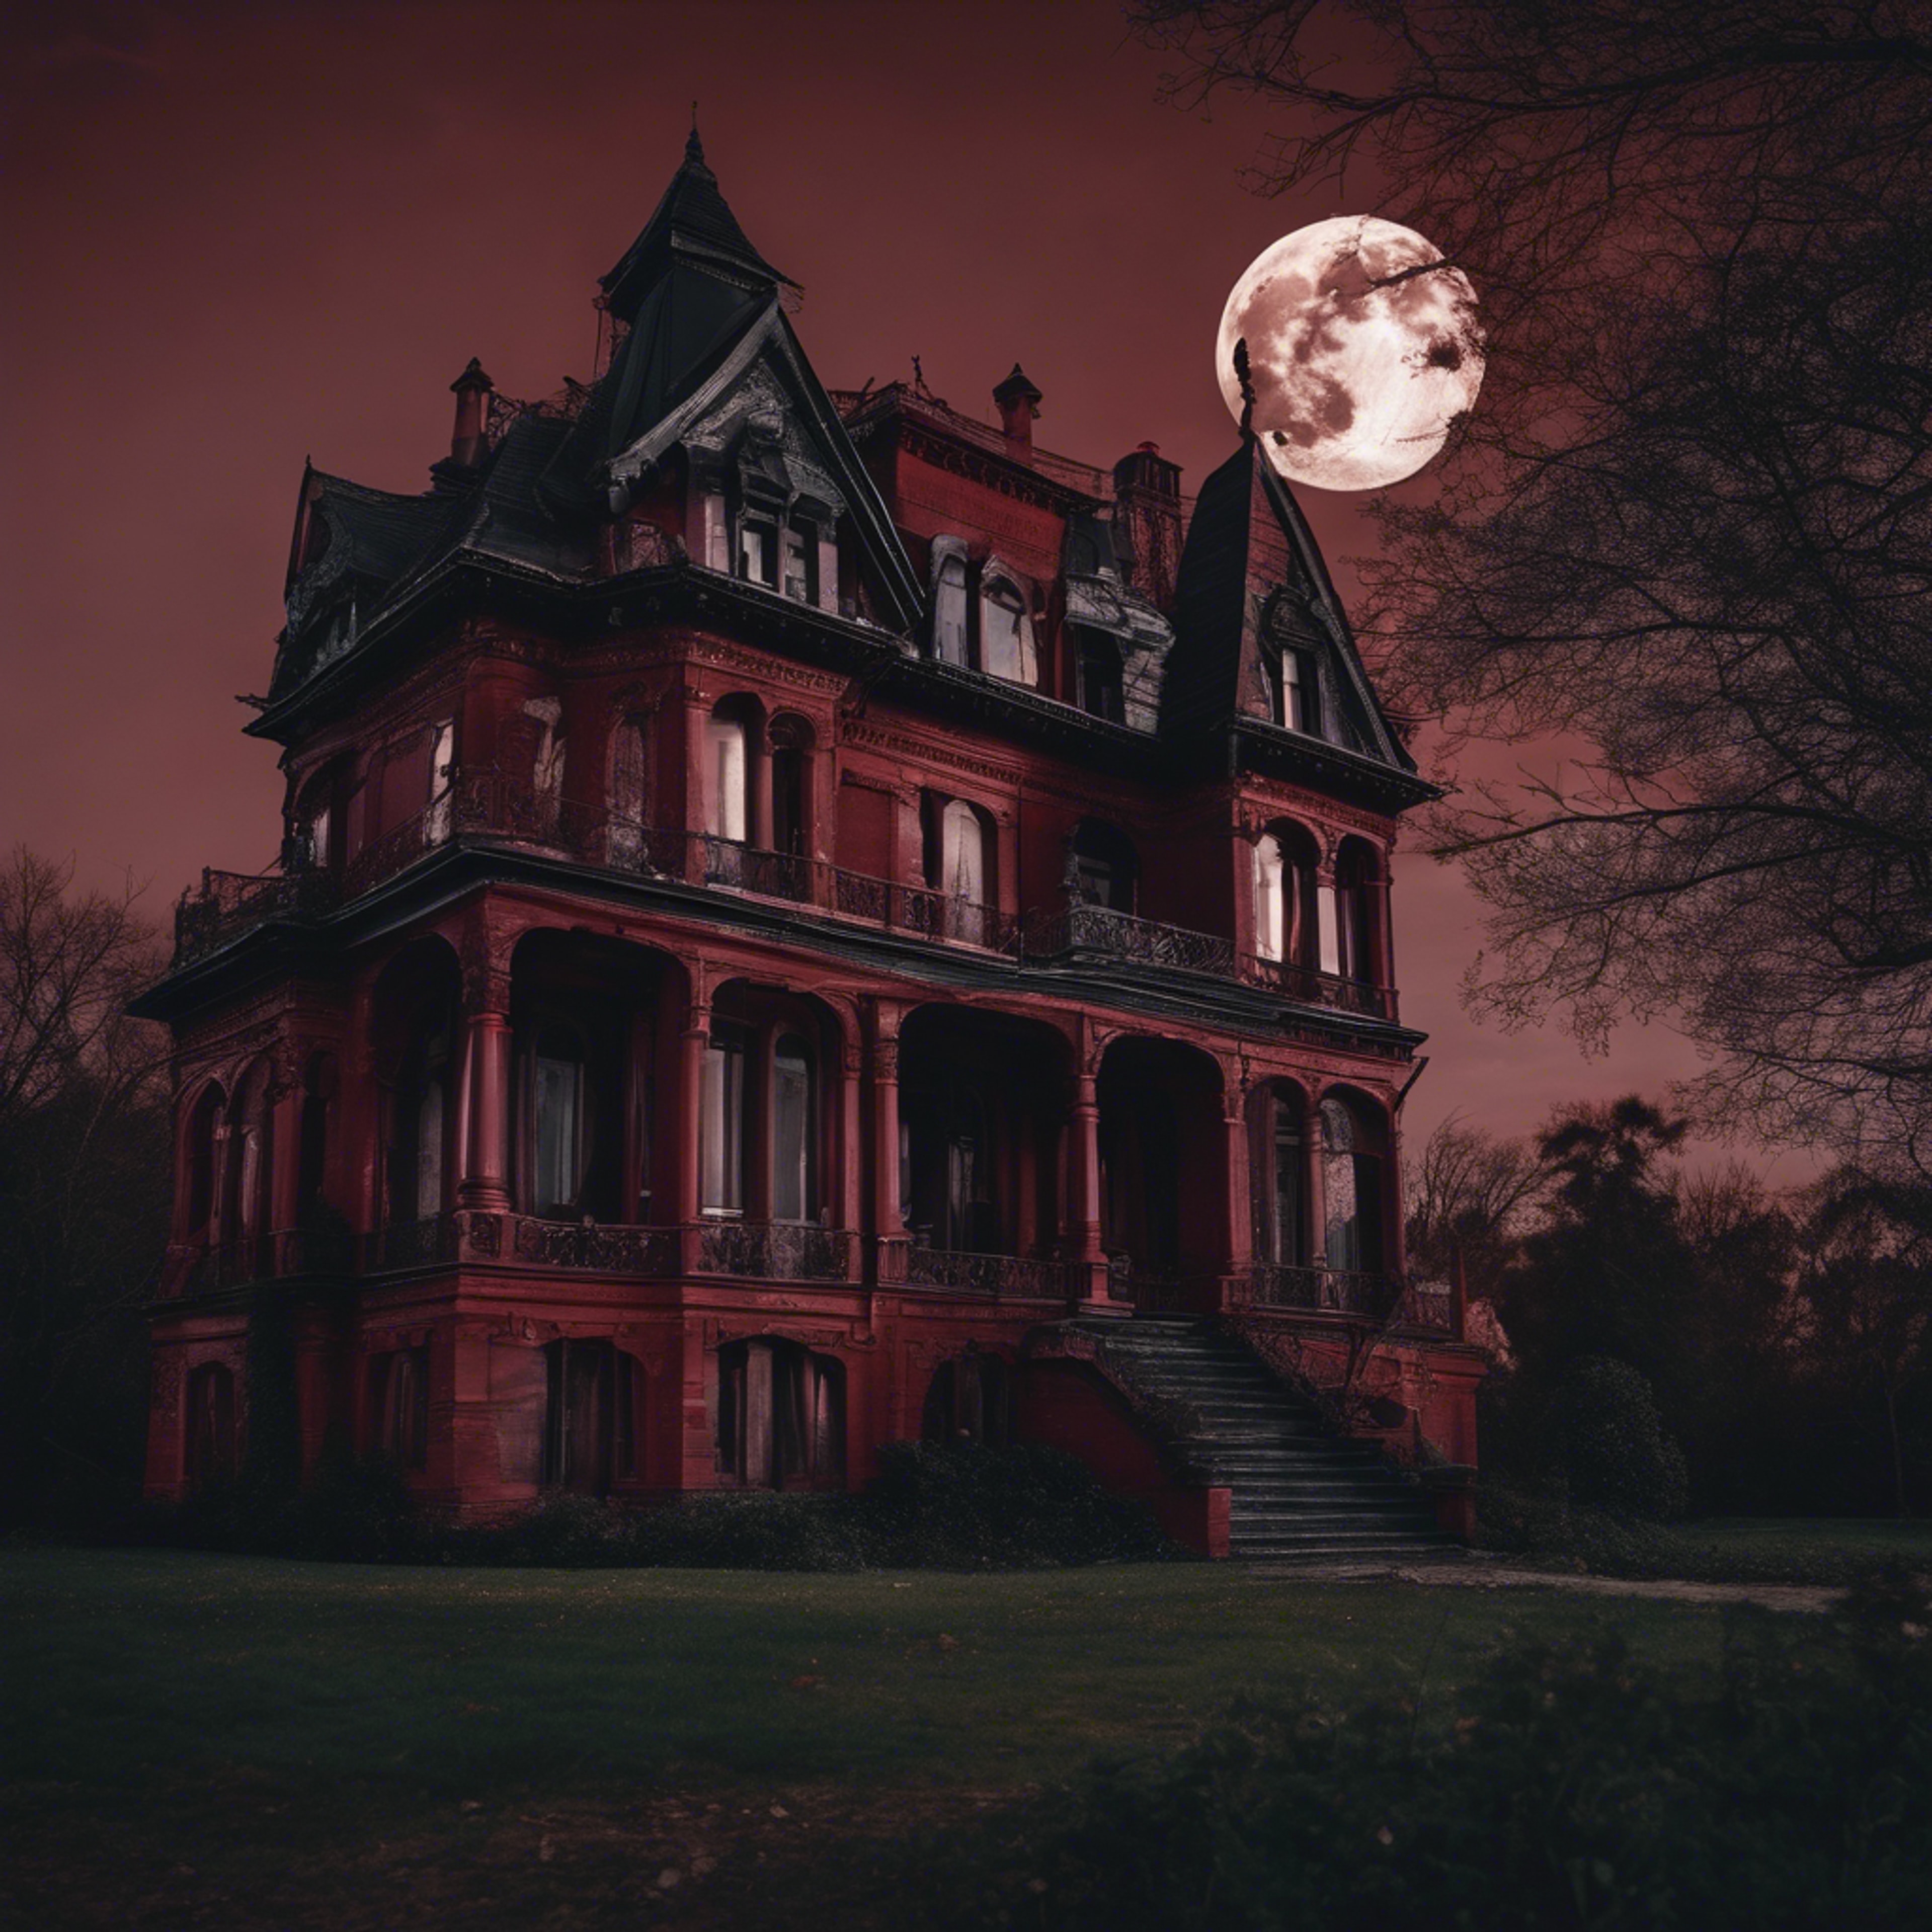 Moody view of an old Victorian mansion in dark red hues under a nearly full moon. Hintergrund[8b4d1d2d66a3409f8c39]